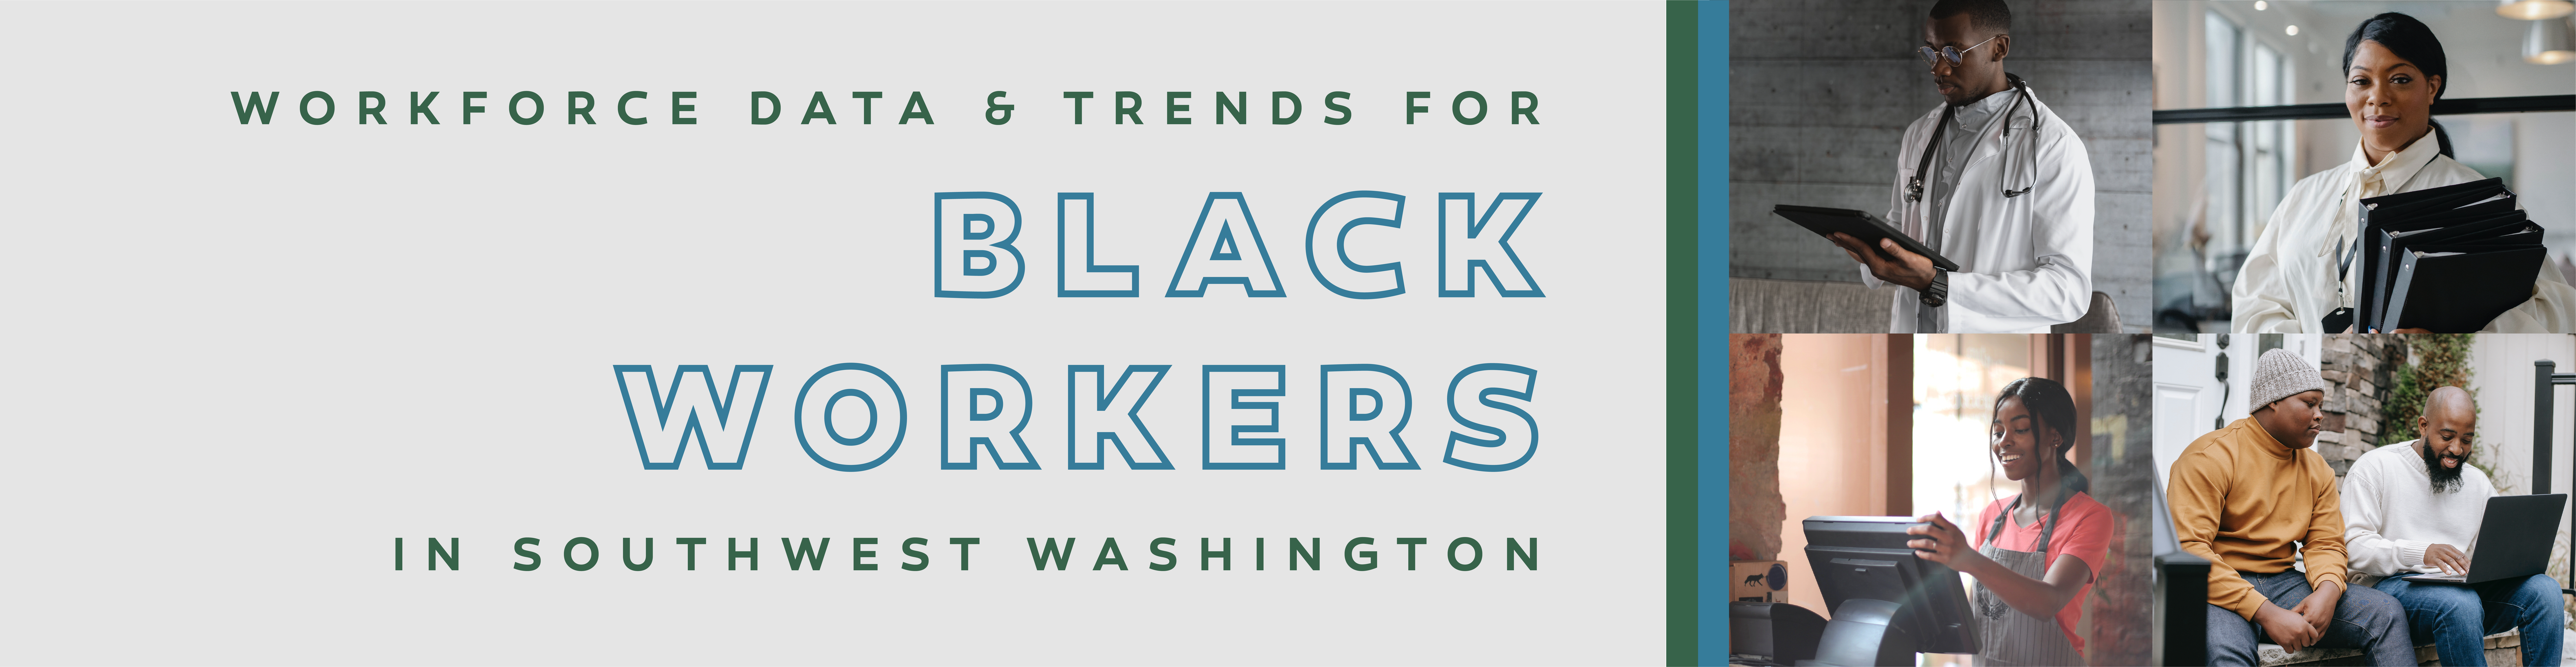 Workforce data attests to wage, employment disparities for Black workers in Southwest Washington